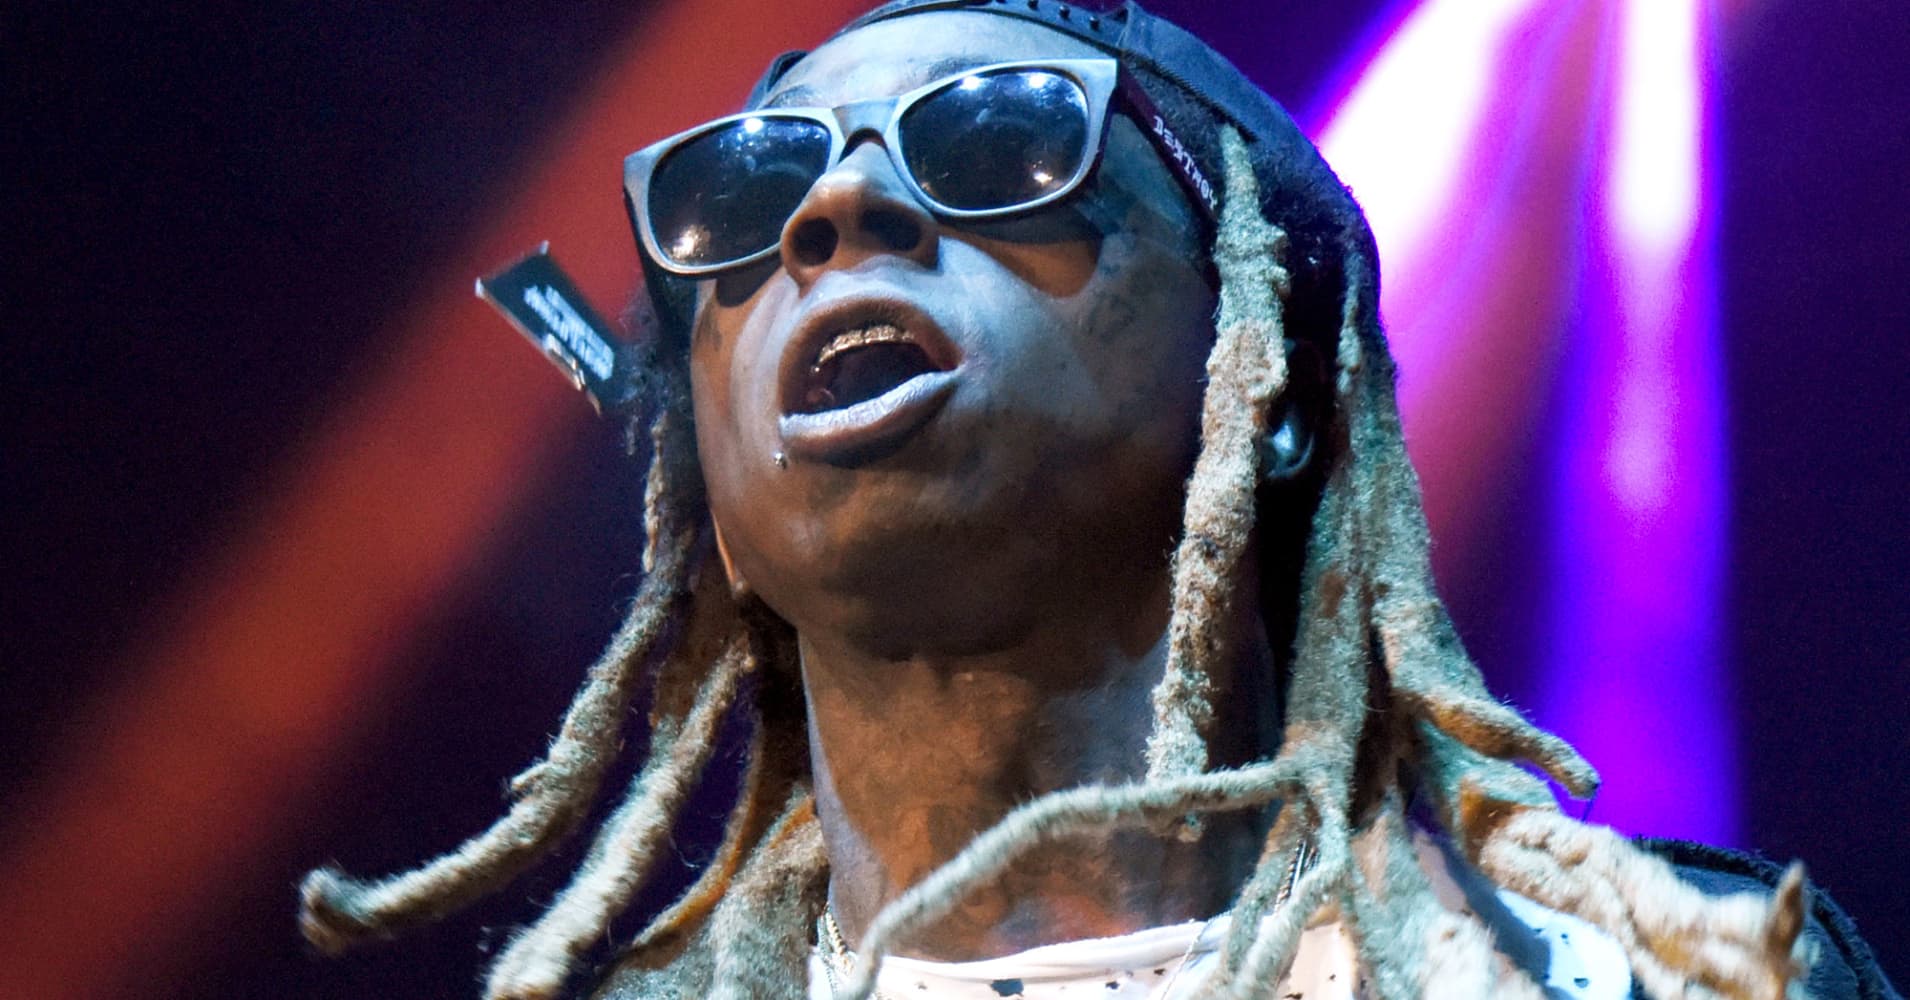 How Lil Wayne is bolstering virtual reality technology - CNBC